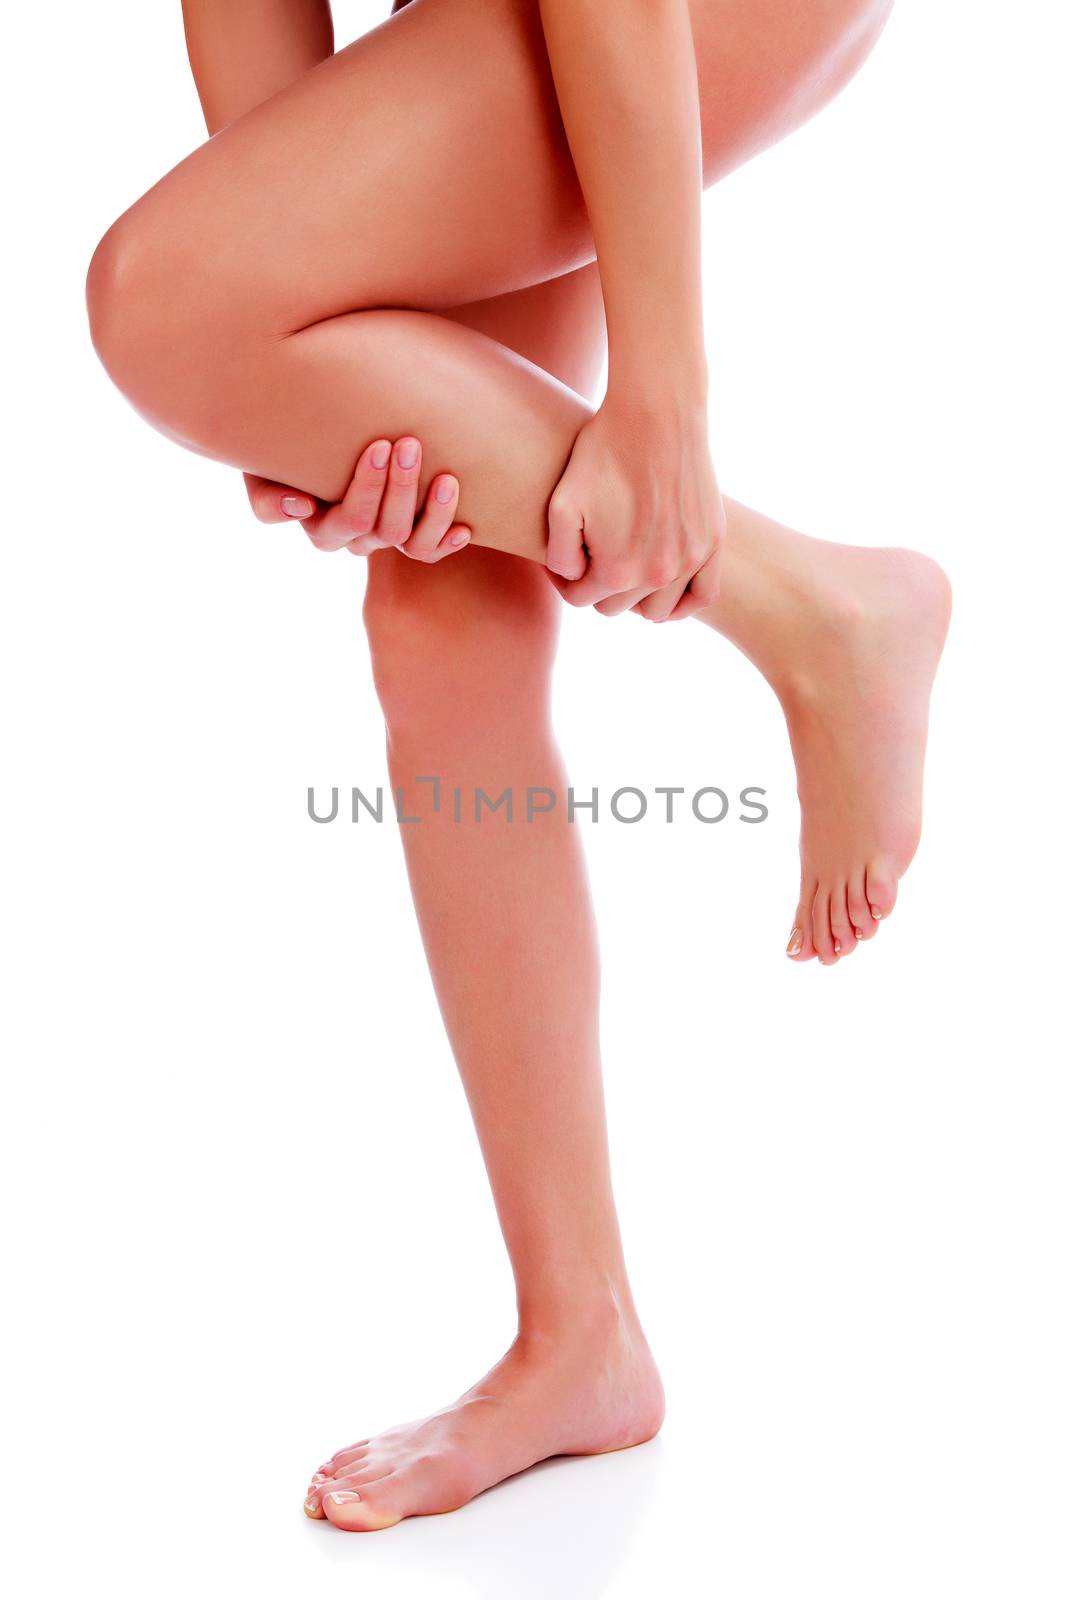 Pain in a leg, isolated on white background